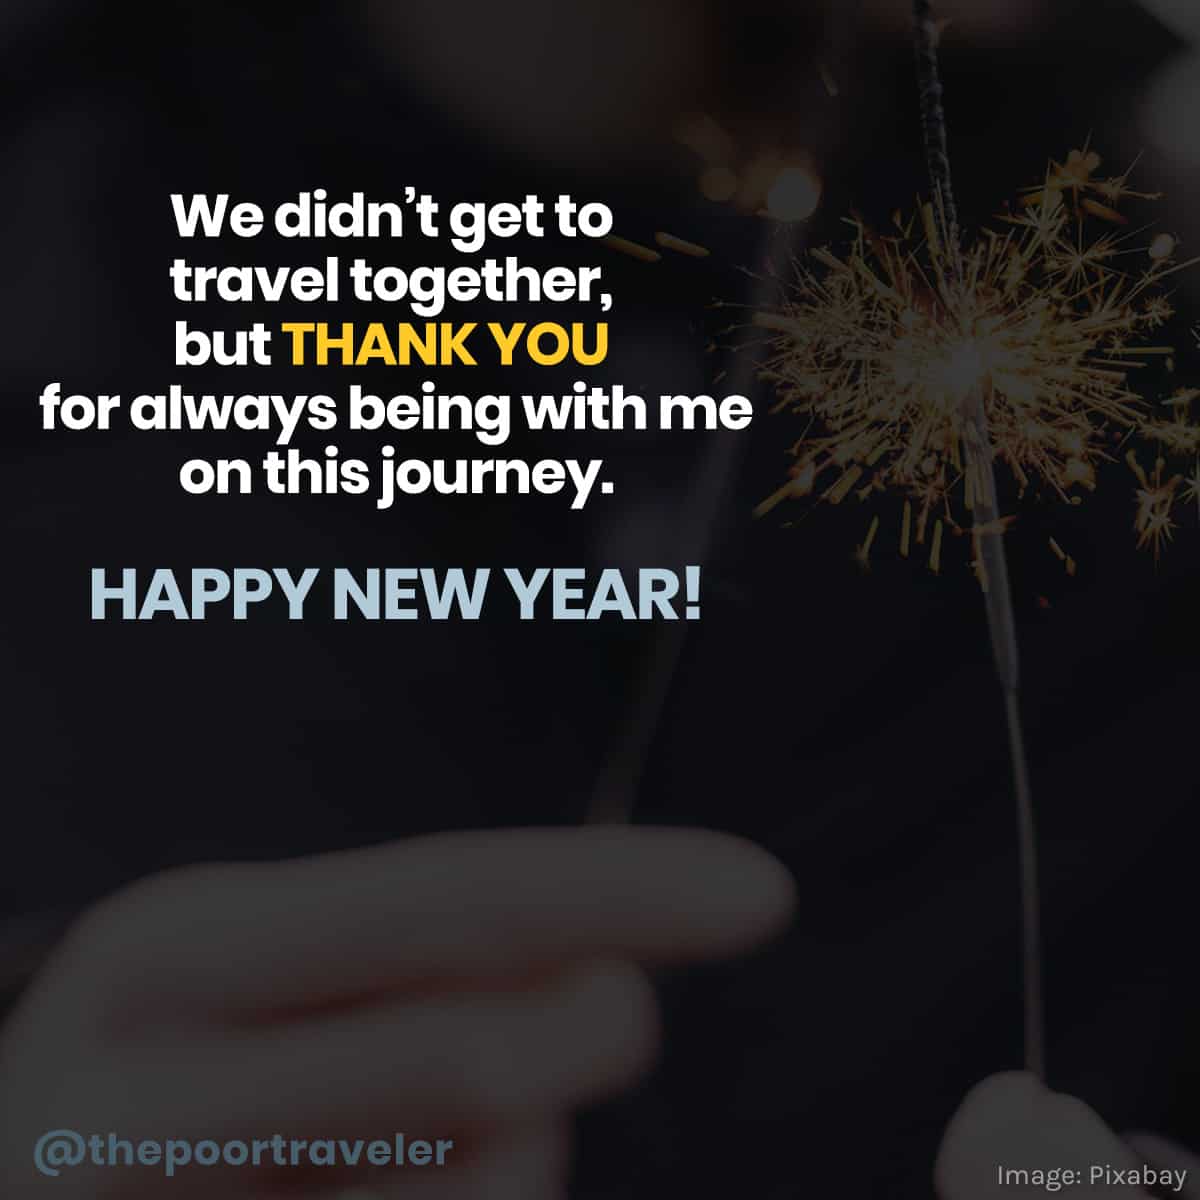 2023 NEW YEAR GREETINGS & INSPIRATIONAL QUOTES for Friends & Travelers |  The Poor Traveler Itinerary Blog